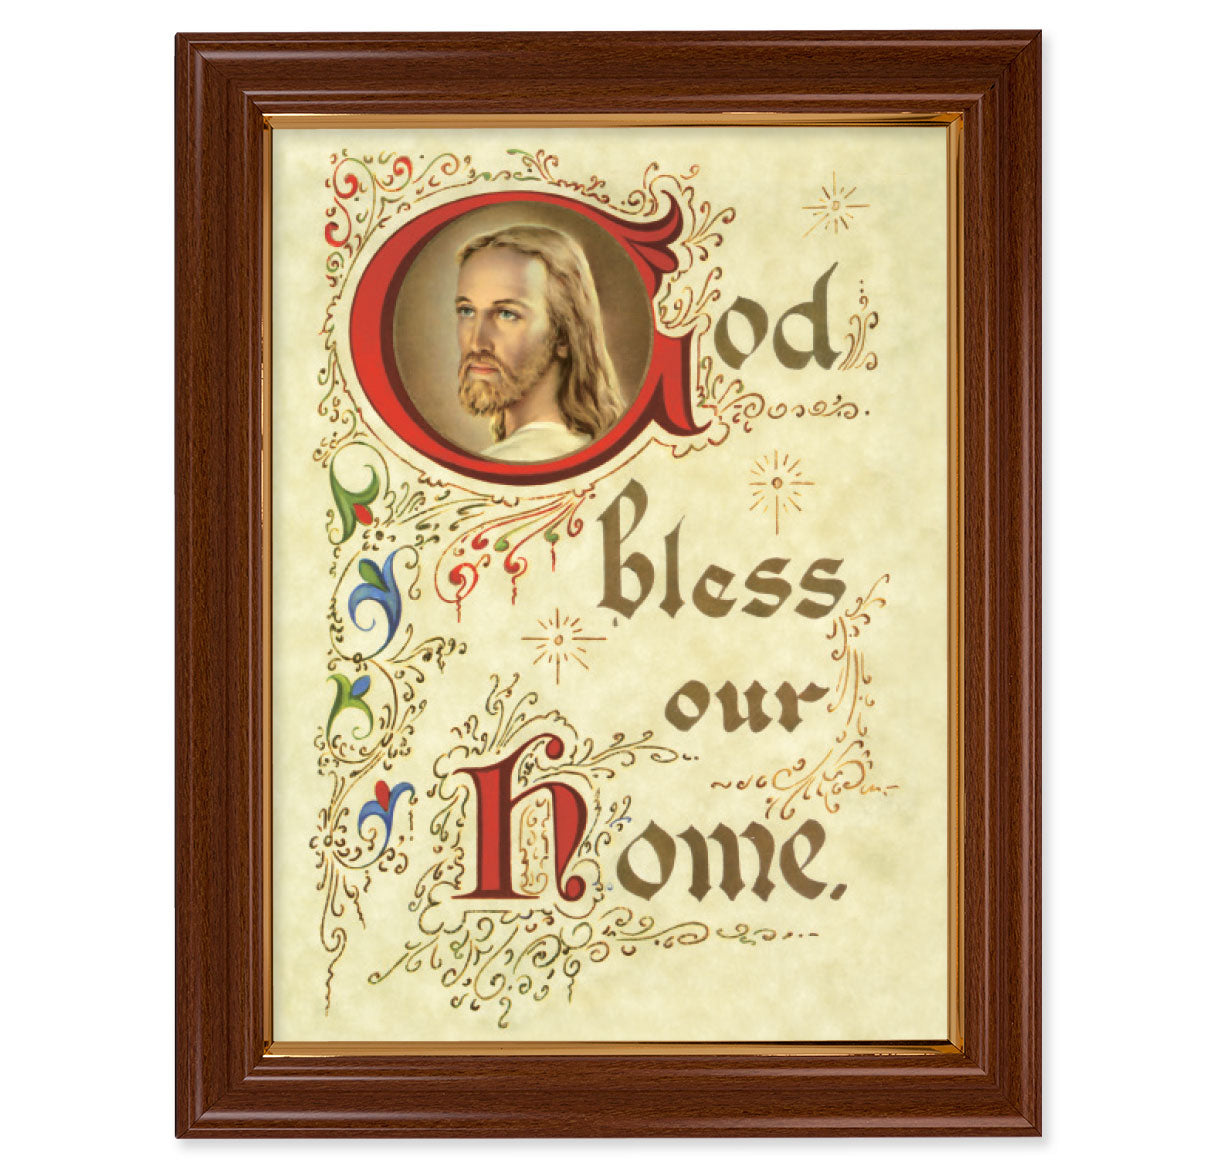 House Blessing Picture Framed Wall Art Decor Extra Large, Traditional Dark Walnut Finished Frame with Thin Gold Lip